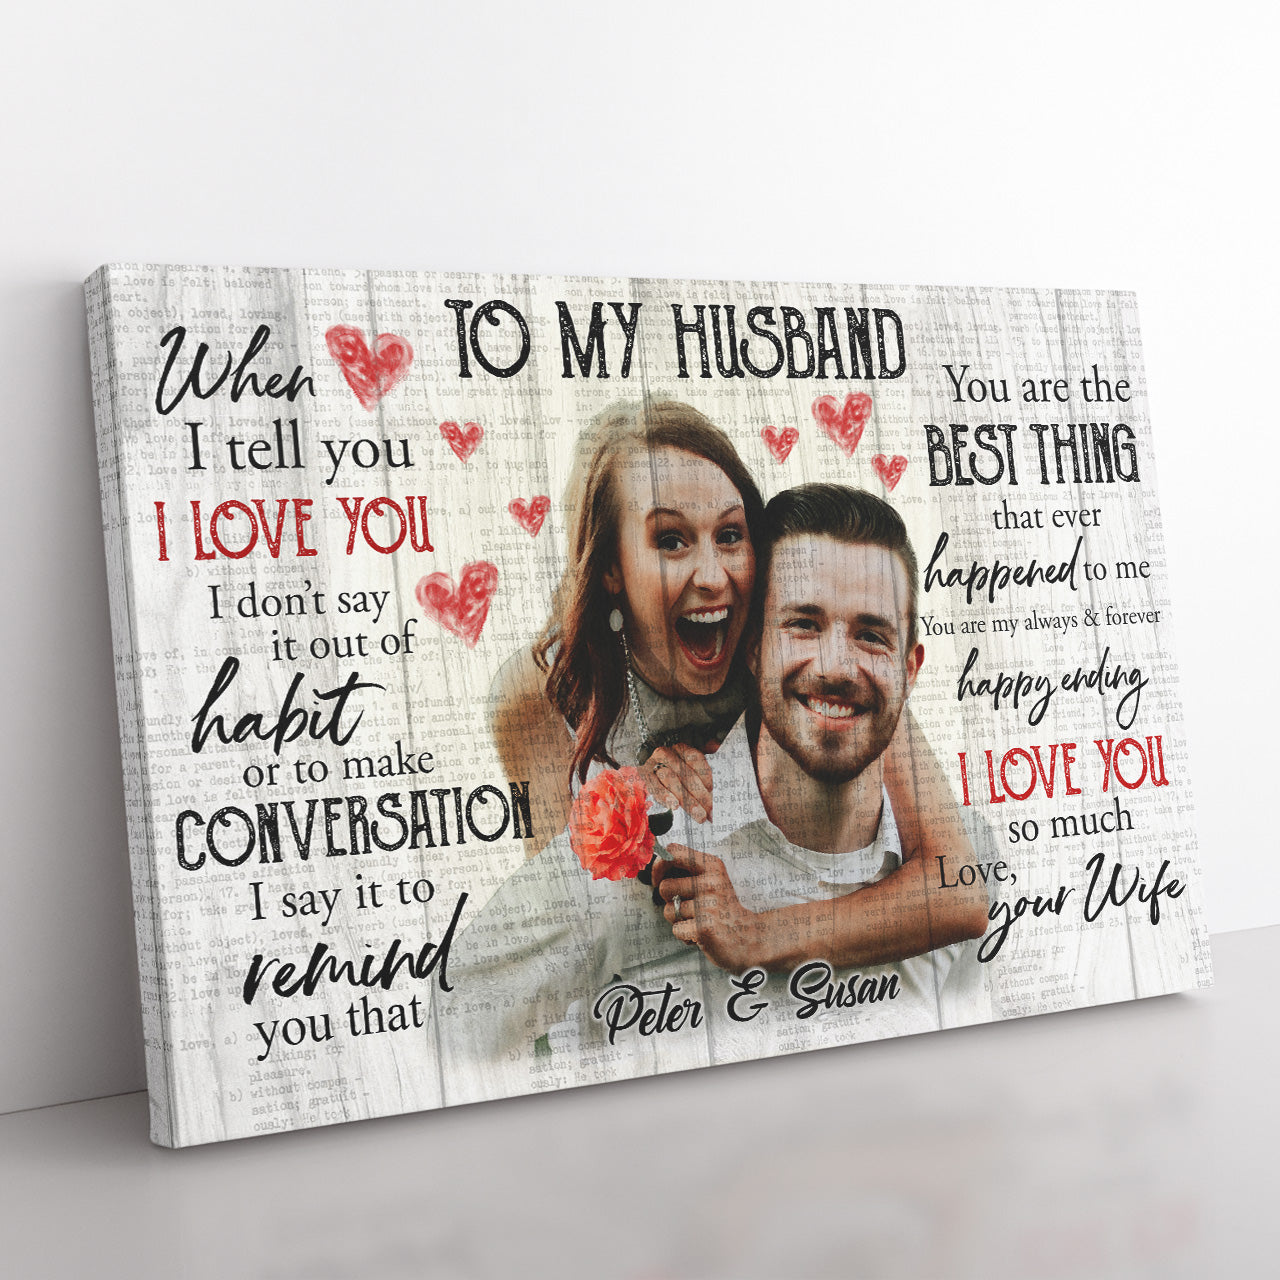 Valentines Day Gift for Him, Personalized Gifts for Boyfriend